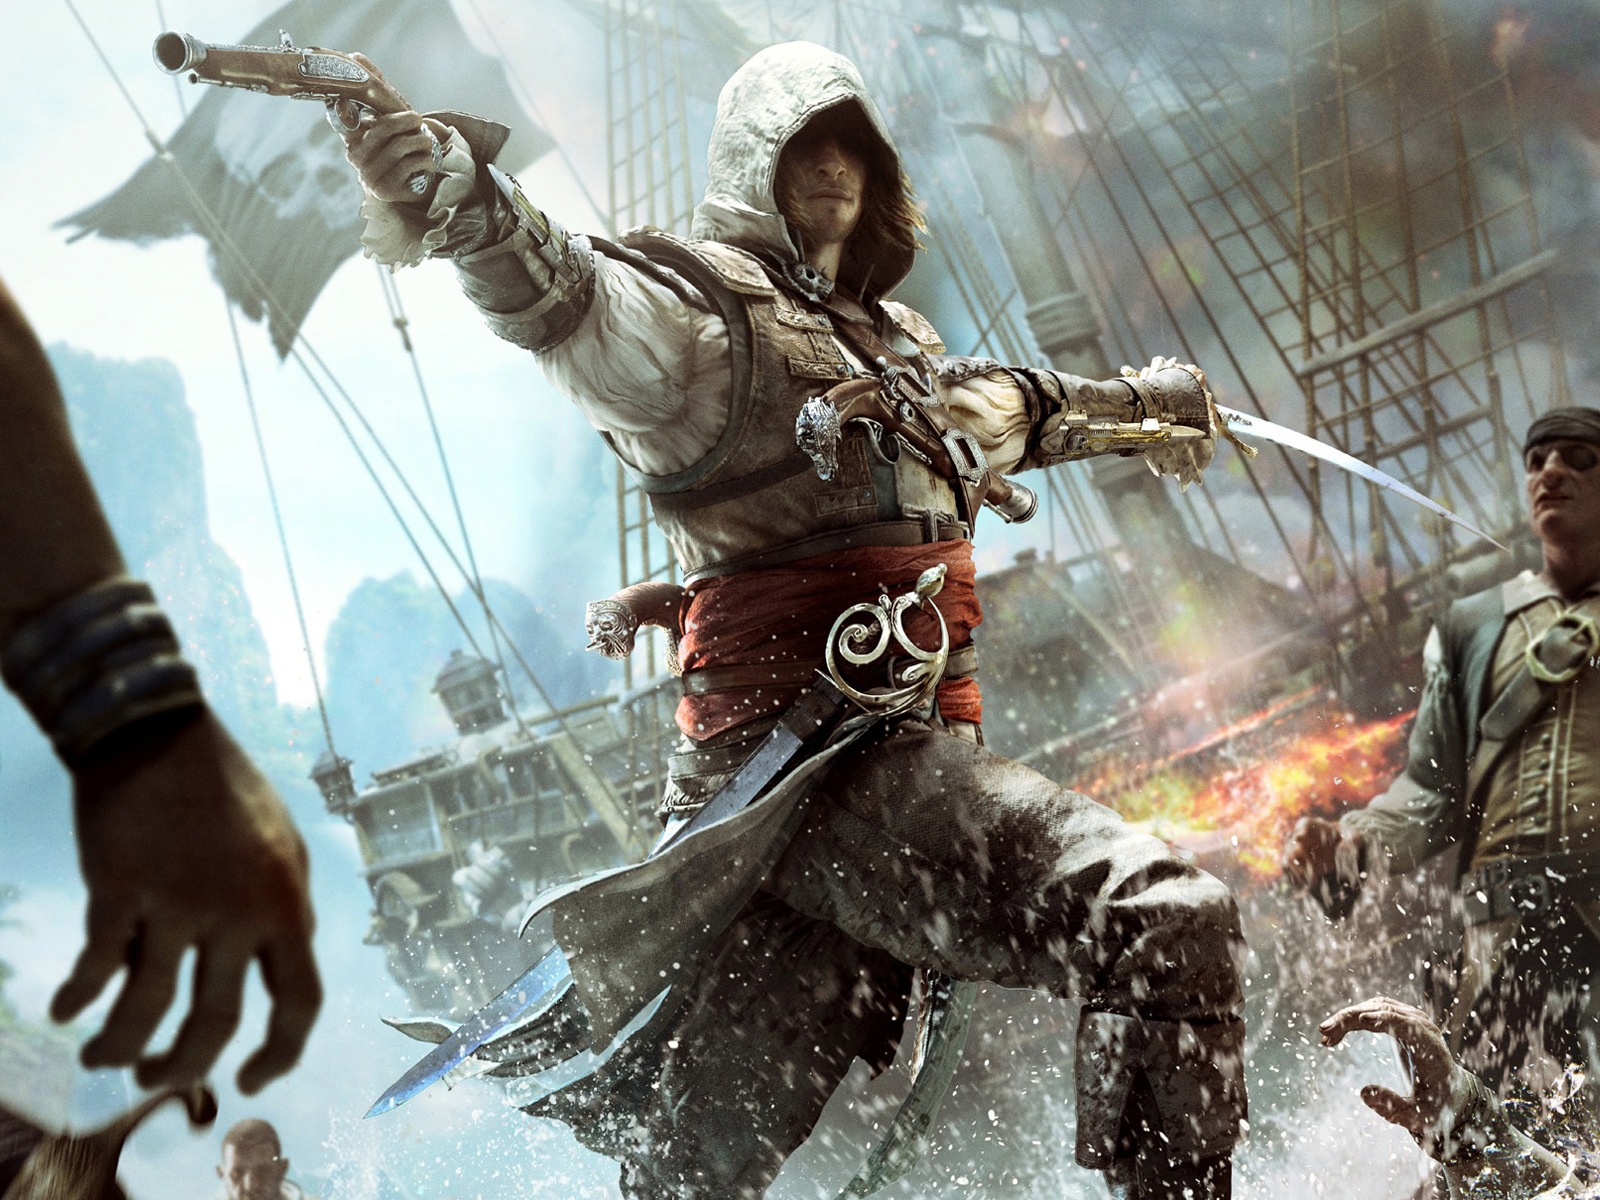 Creed IV Assassin: Black Flag HD wallpapers #6 - 1600x1200